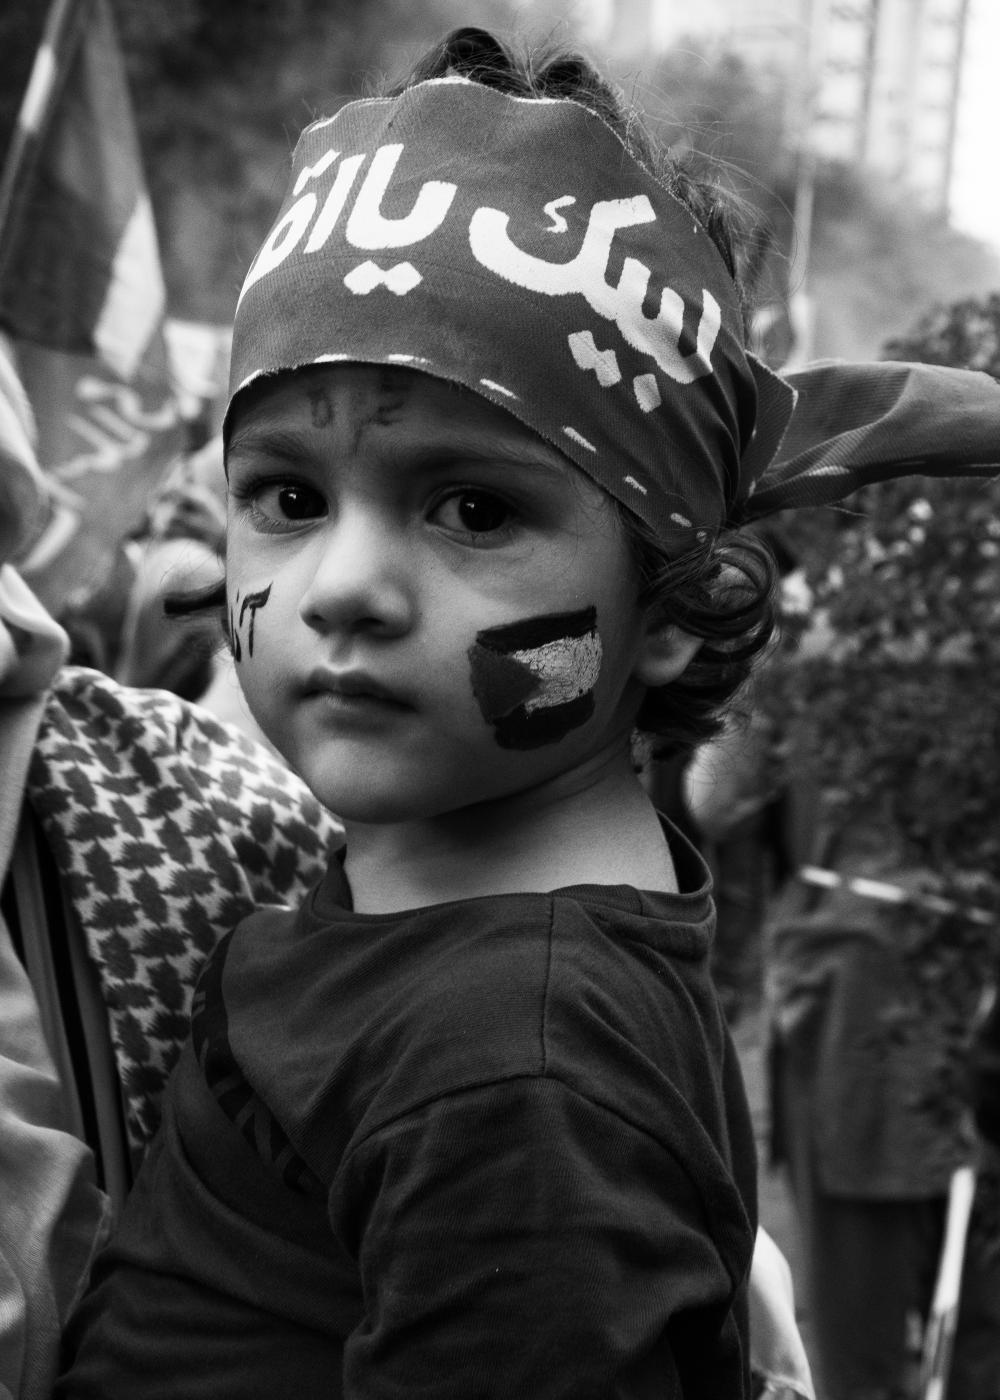 From the river to the sea - A child with a Palestinian flag painted on her face and a bandana which translates &quot;Here...